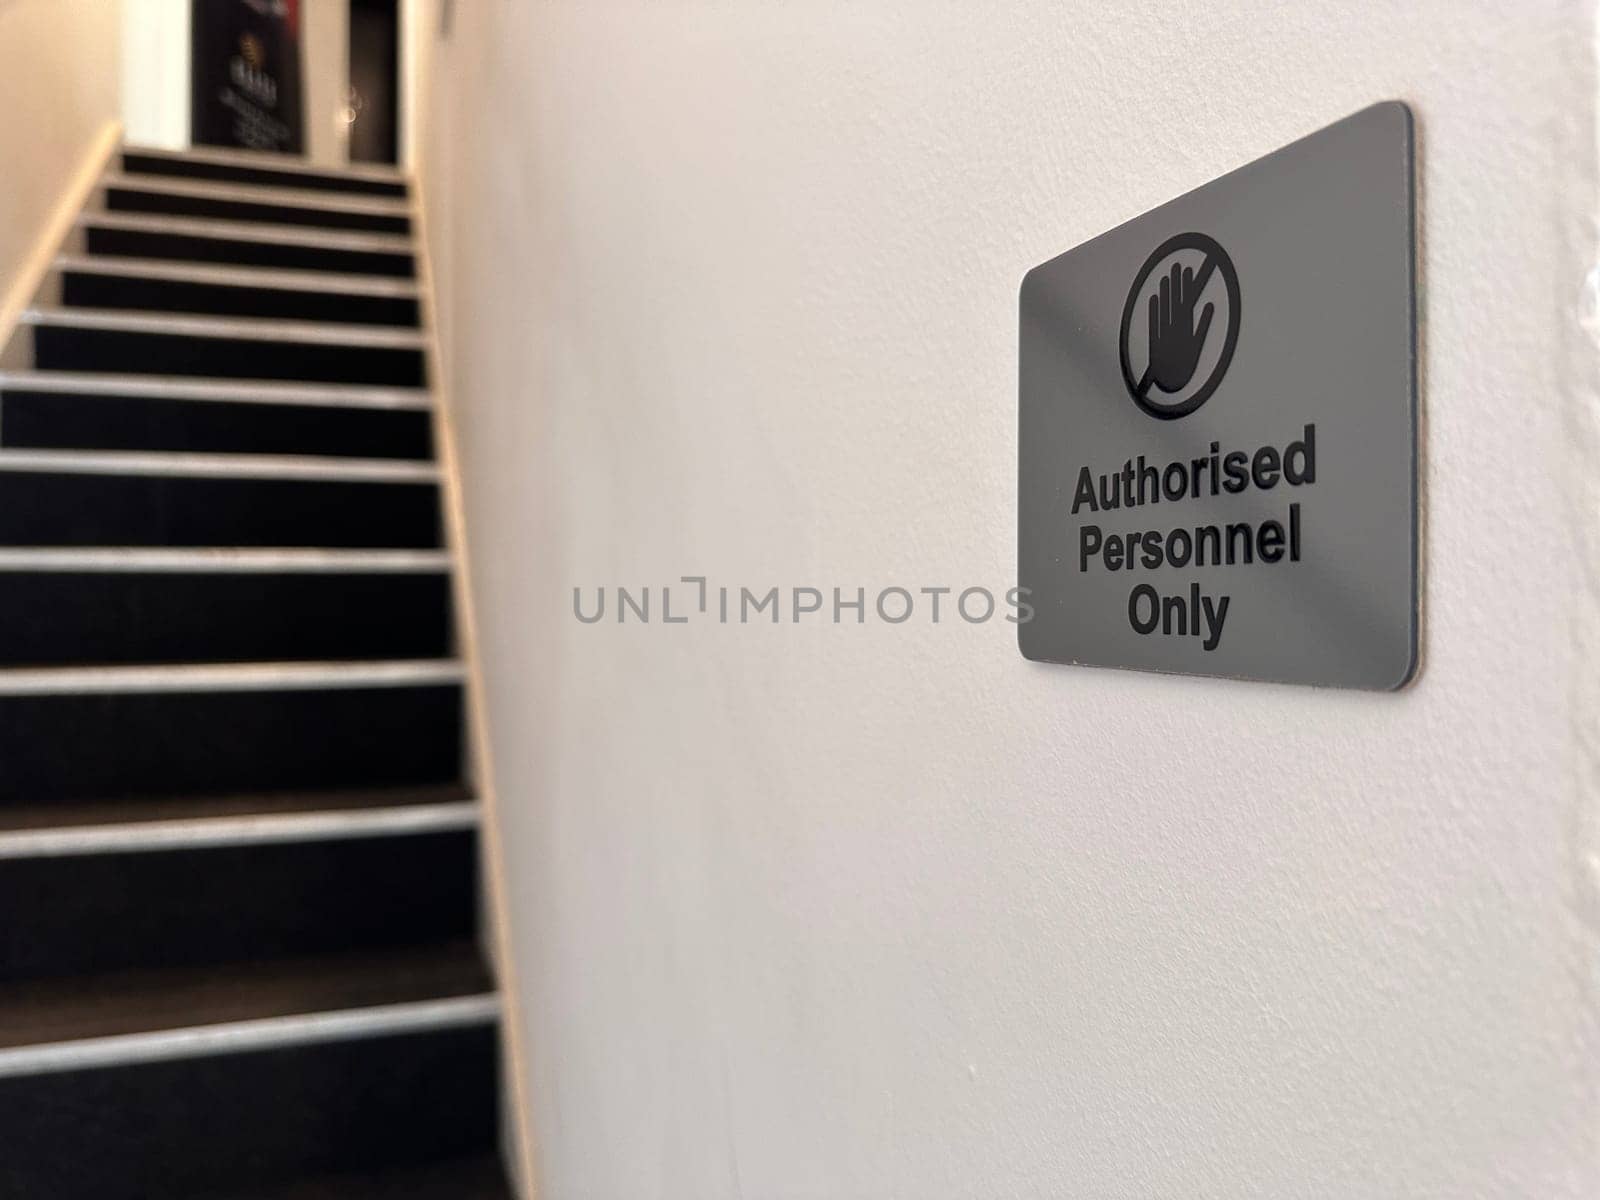 Authorised personnel only sign on the wall